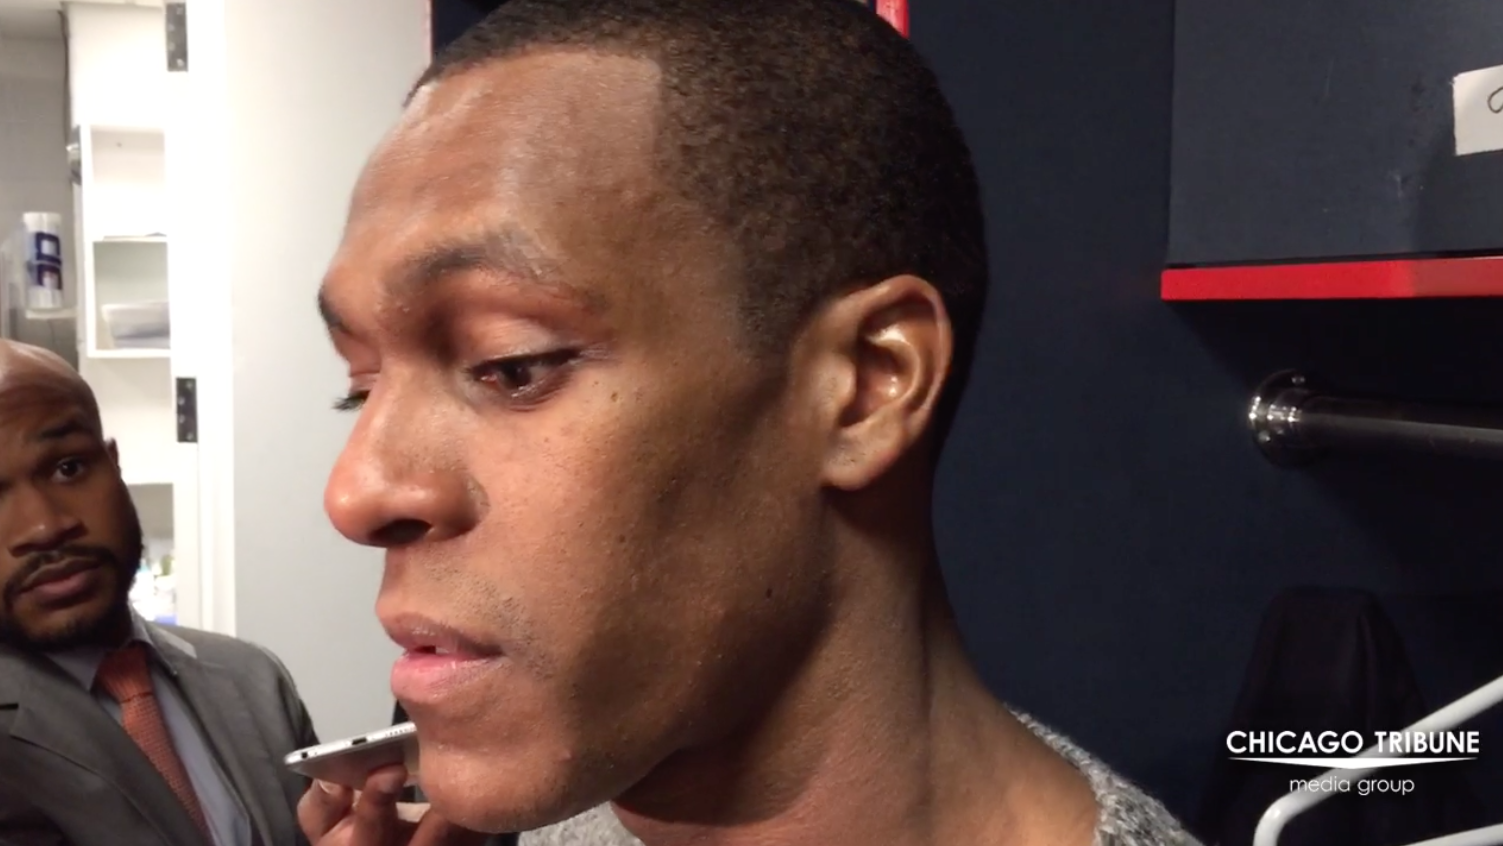 Rajon Rondo discusses his situation with the Bulls